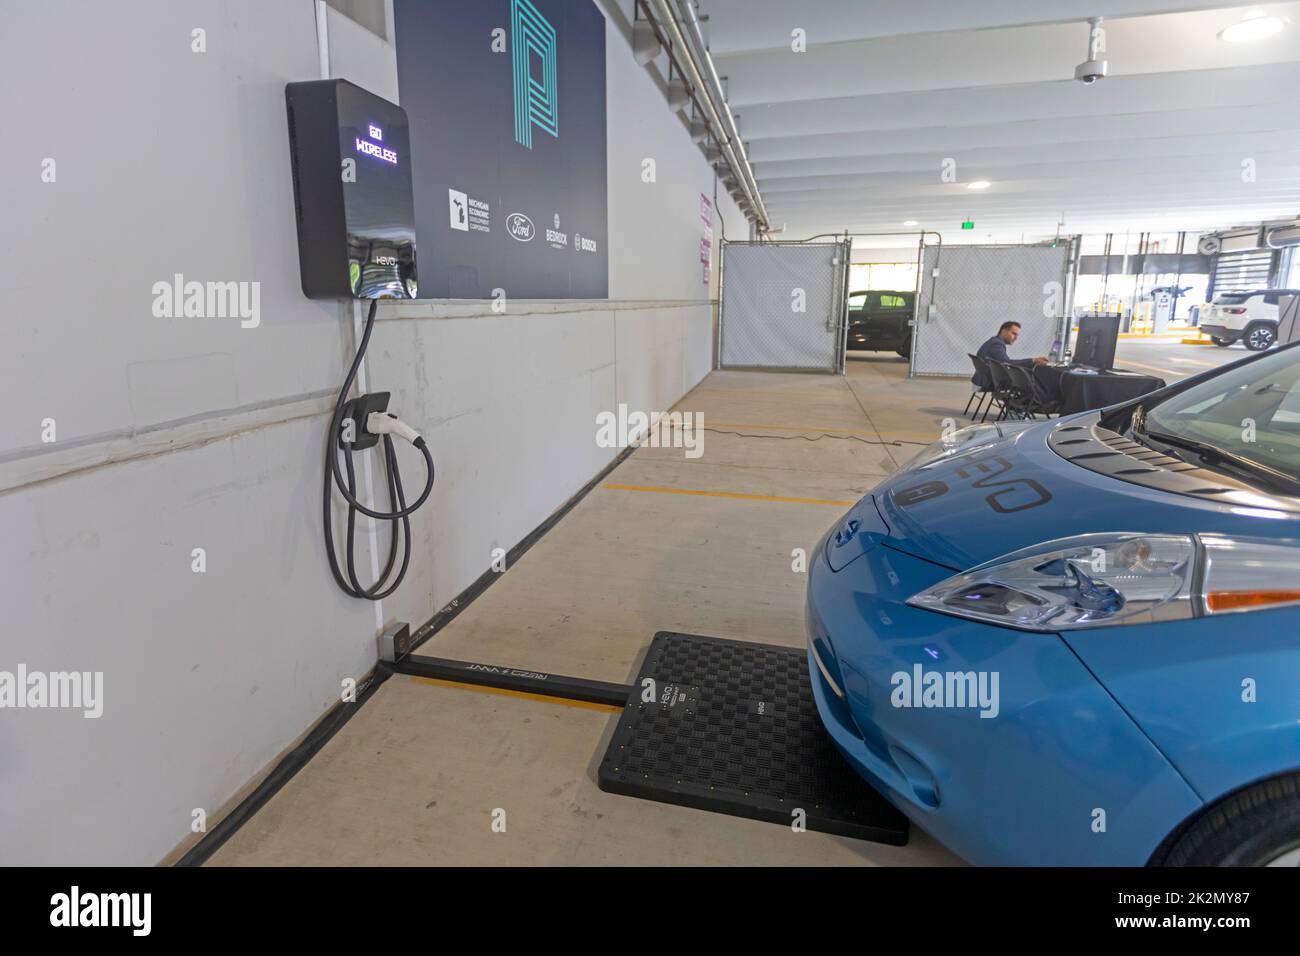 Detroit, Michigan - The Detroit Smart Parking Lab, a research center operated by the American Center for Mobility in a parking garage. The center test Stock Photo